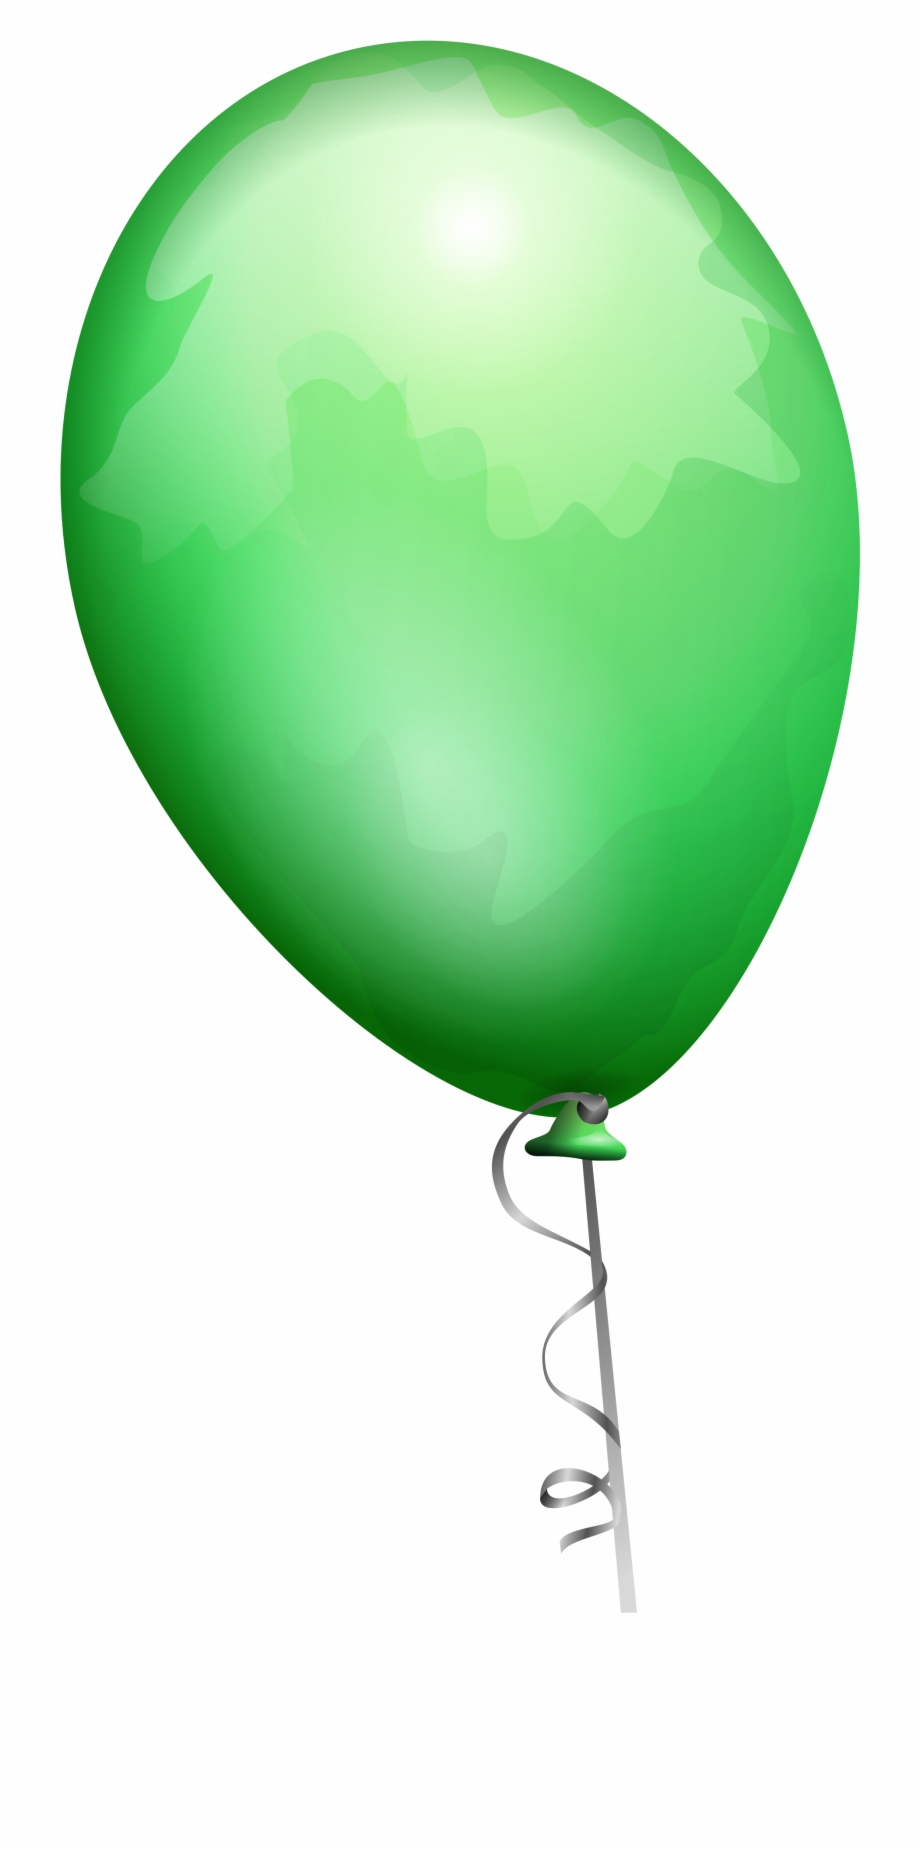 Png Black And White Balloons Svg Green Balloon